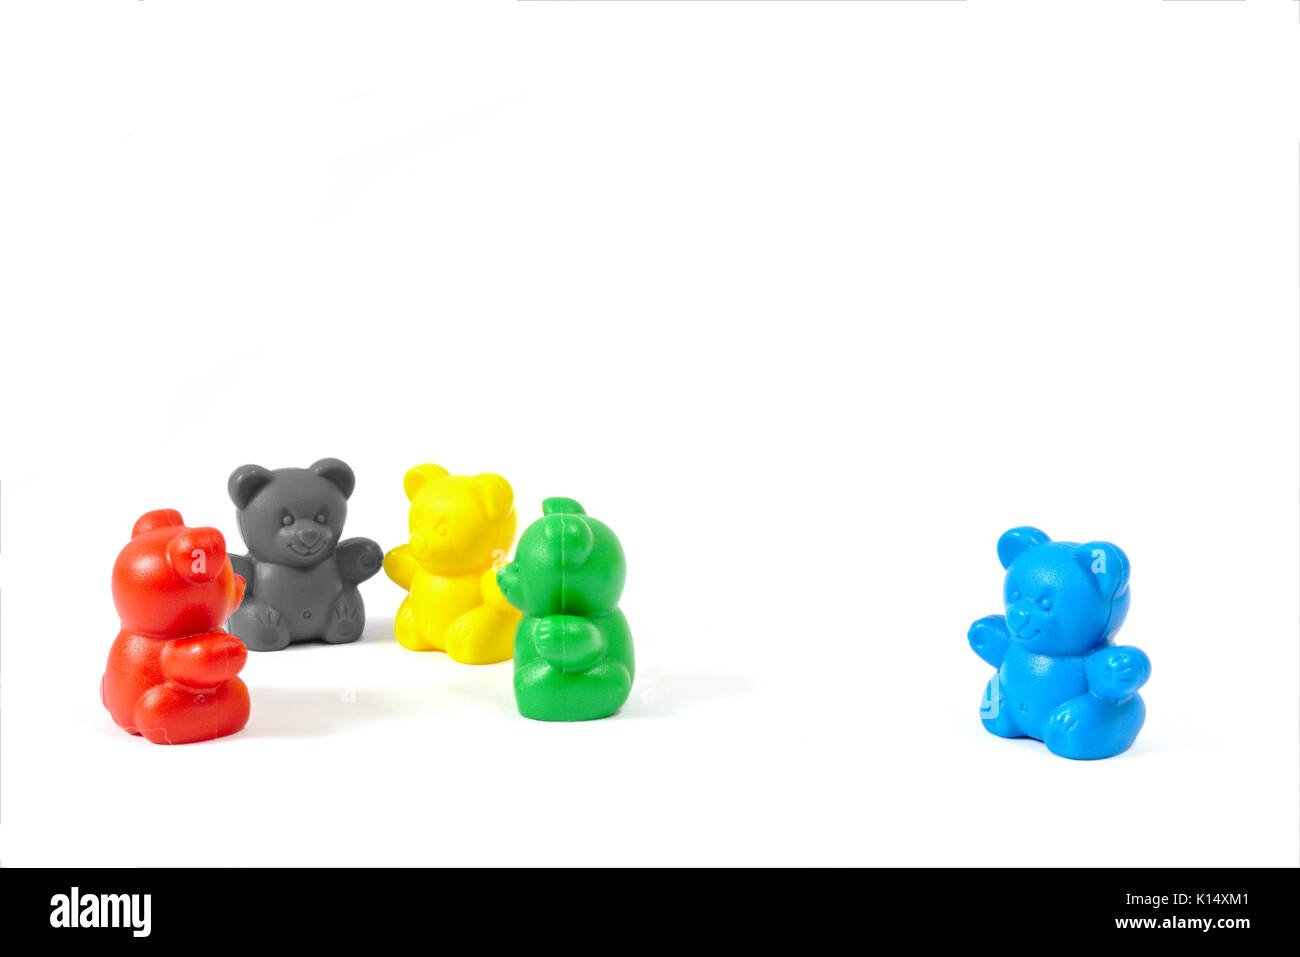 Plastic toy figures in the colors of the major political parties in Germany (AfD clearly isolated off to the side) isolated on white background Stock Photo